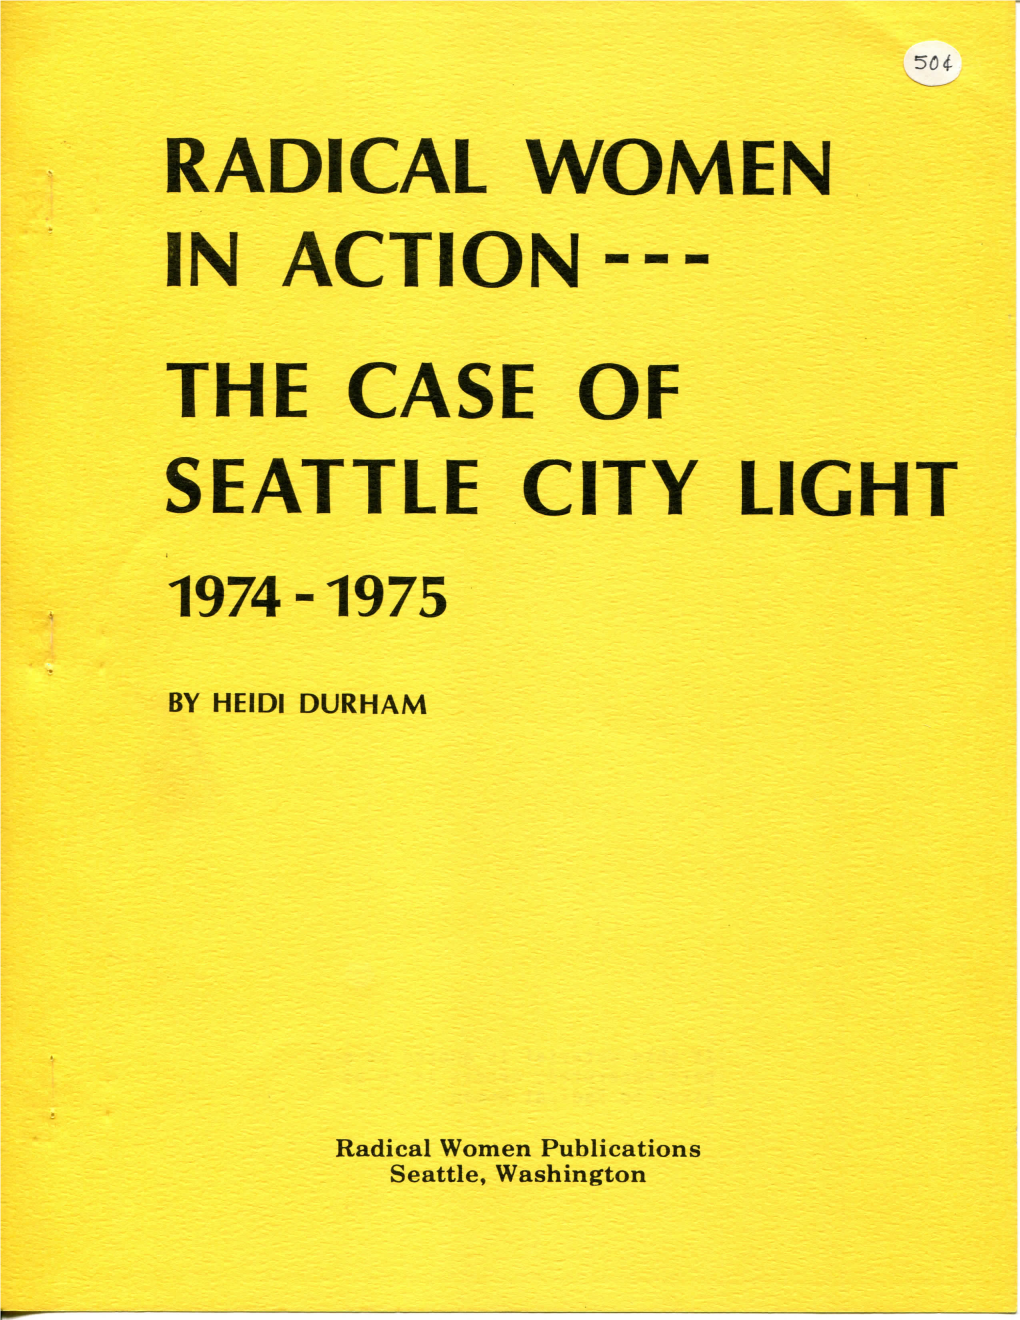 Radical Women in Action--- the Case of Seattle City Light 1974 -1975